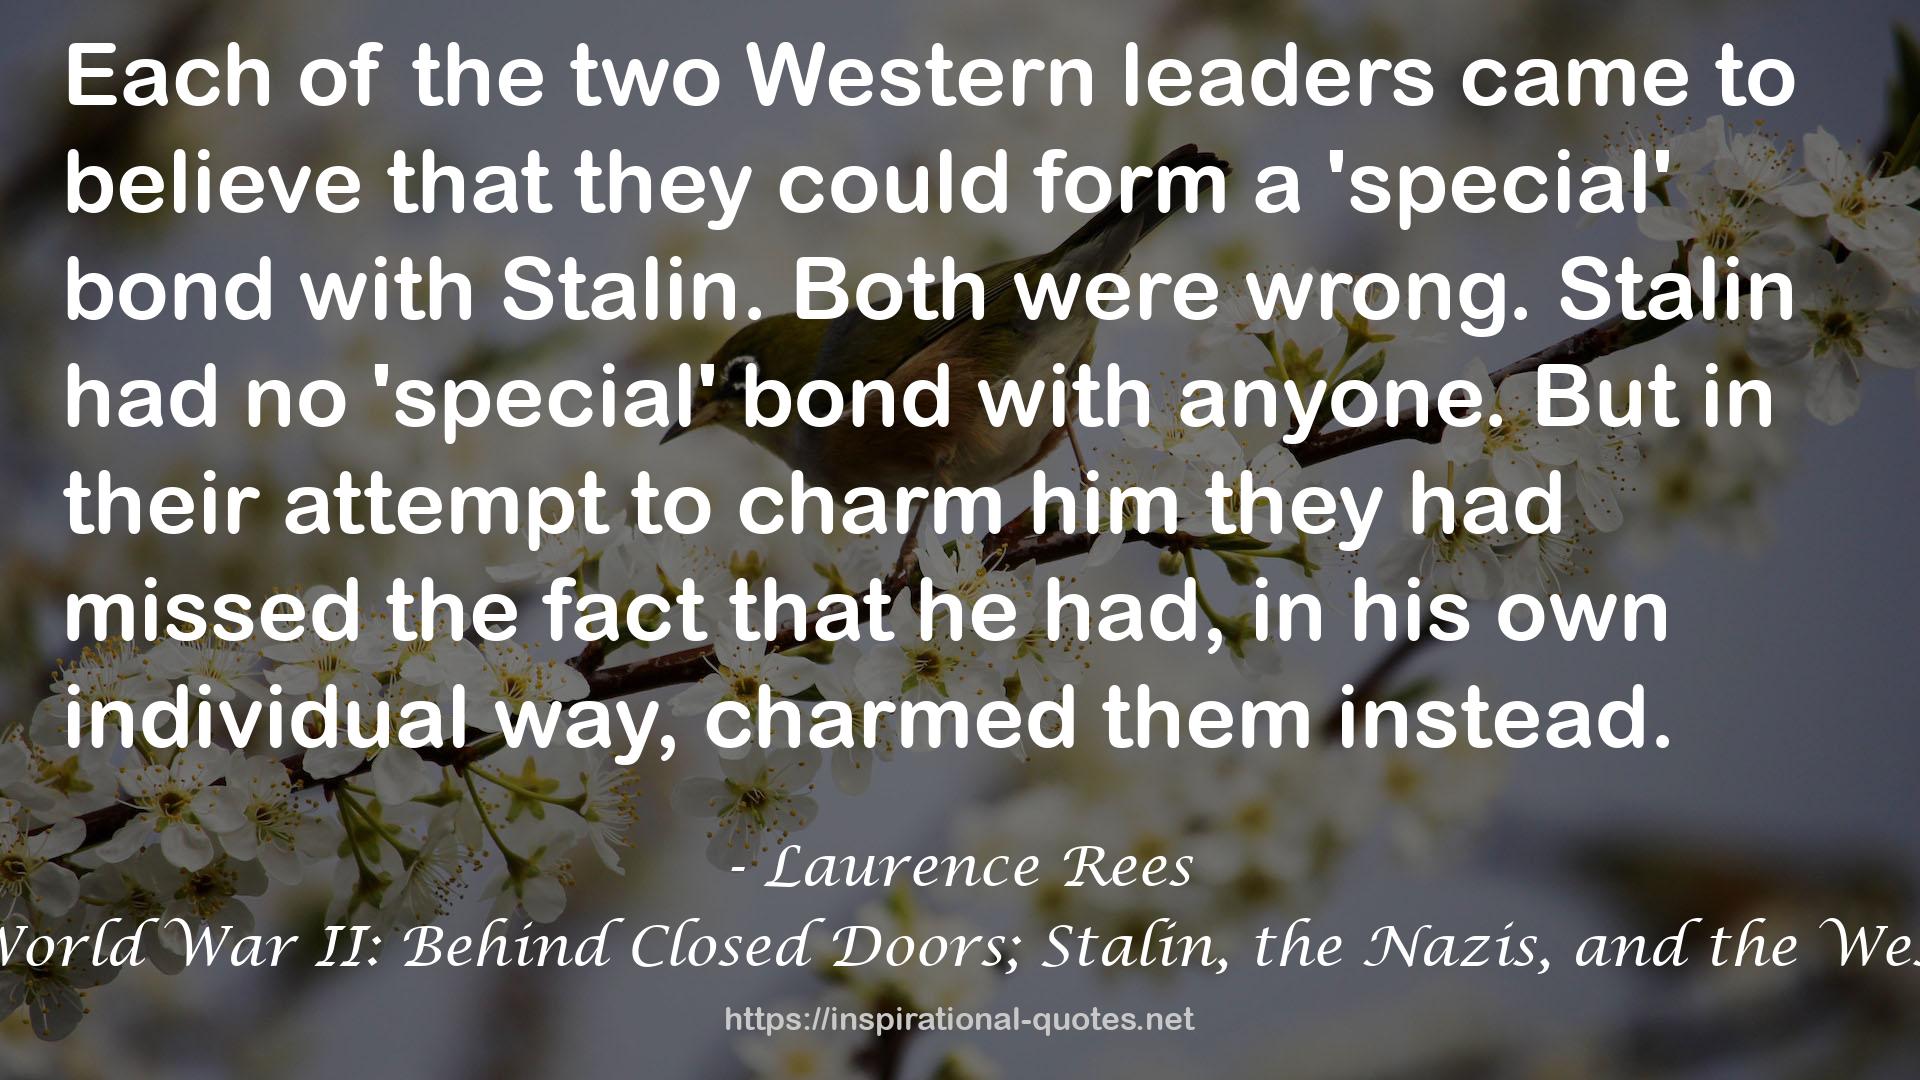 World War II: Behind Closed Doors; Stalin, the Nazis, and the West QUOTES